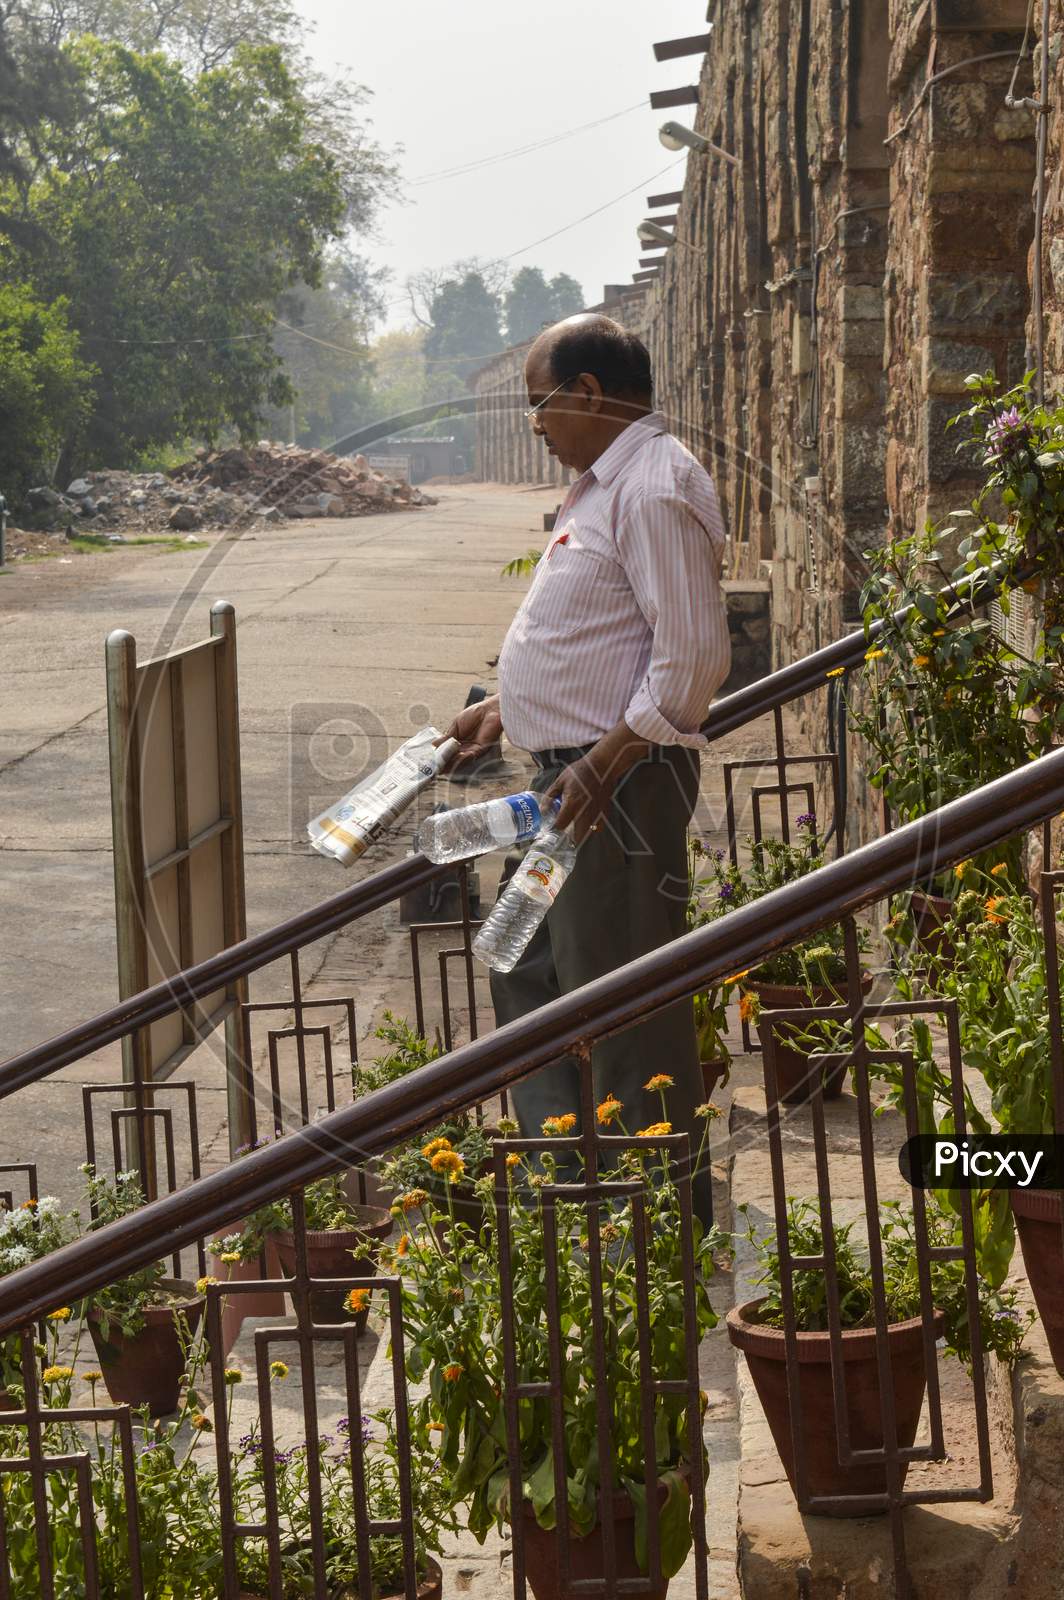 A Men Is Collecting Empty Water Bottle From Lawn Which Is Thrown By Tourist At Old Fort.